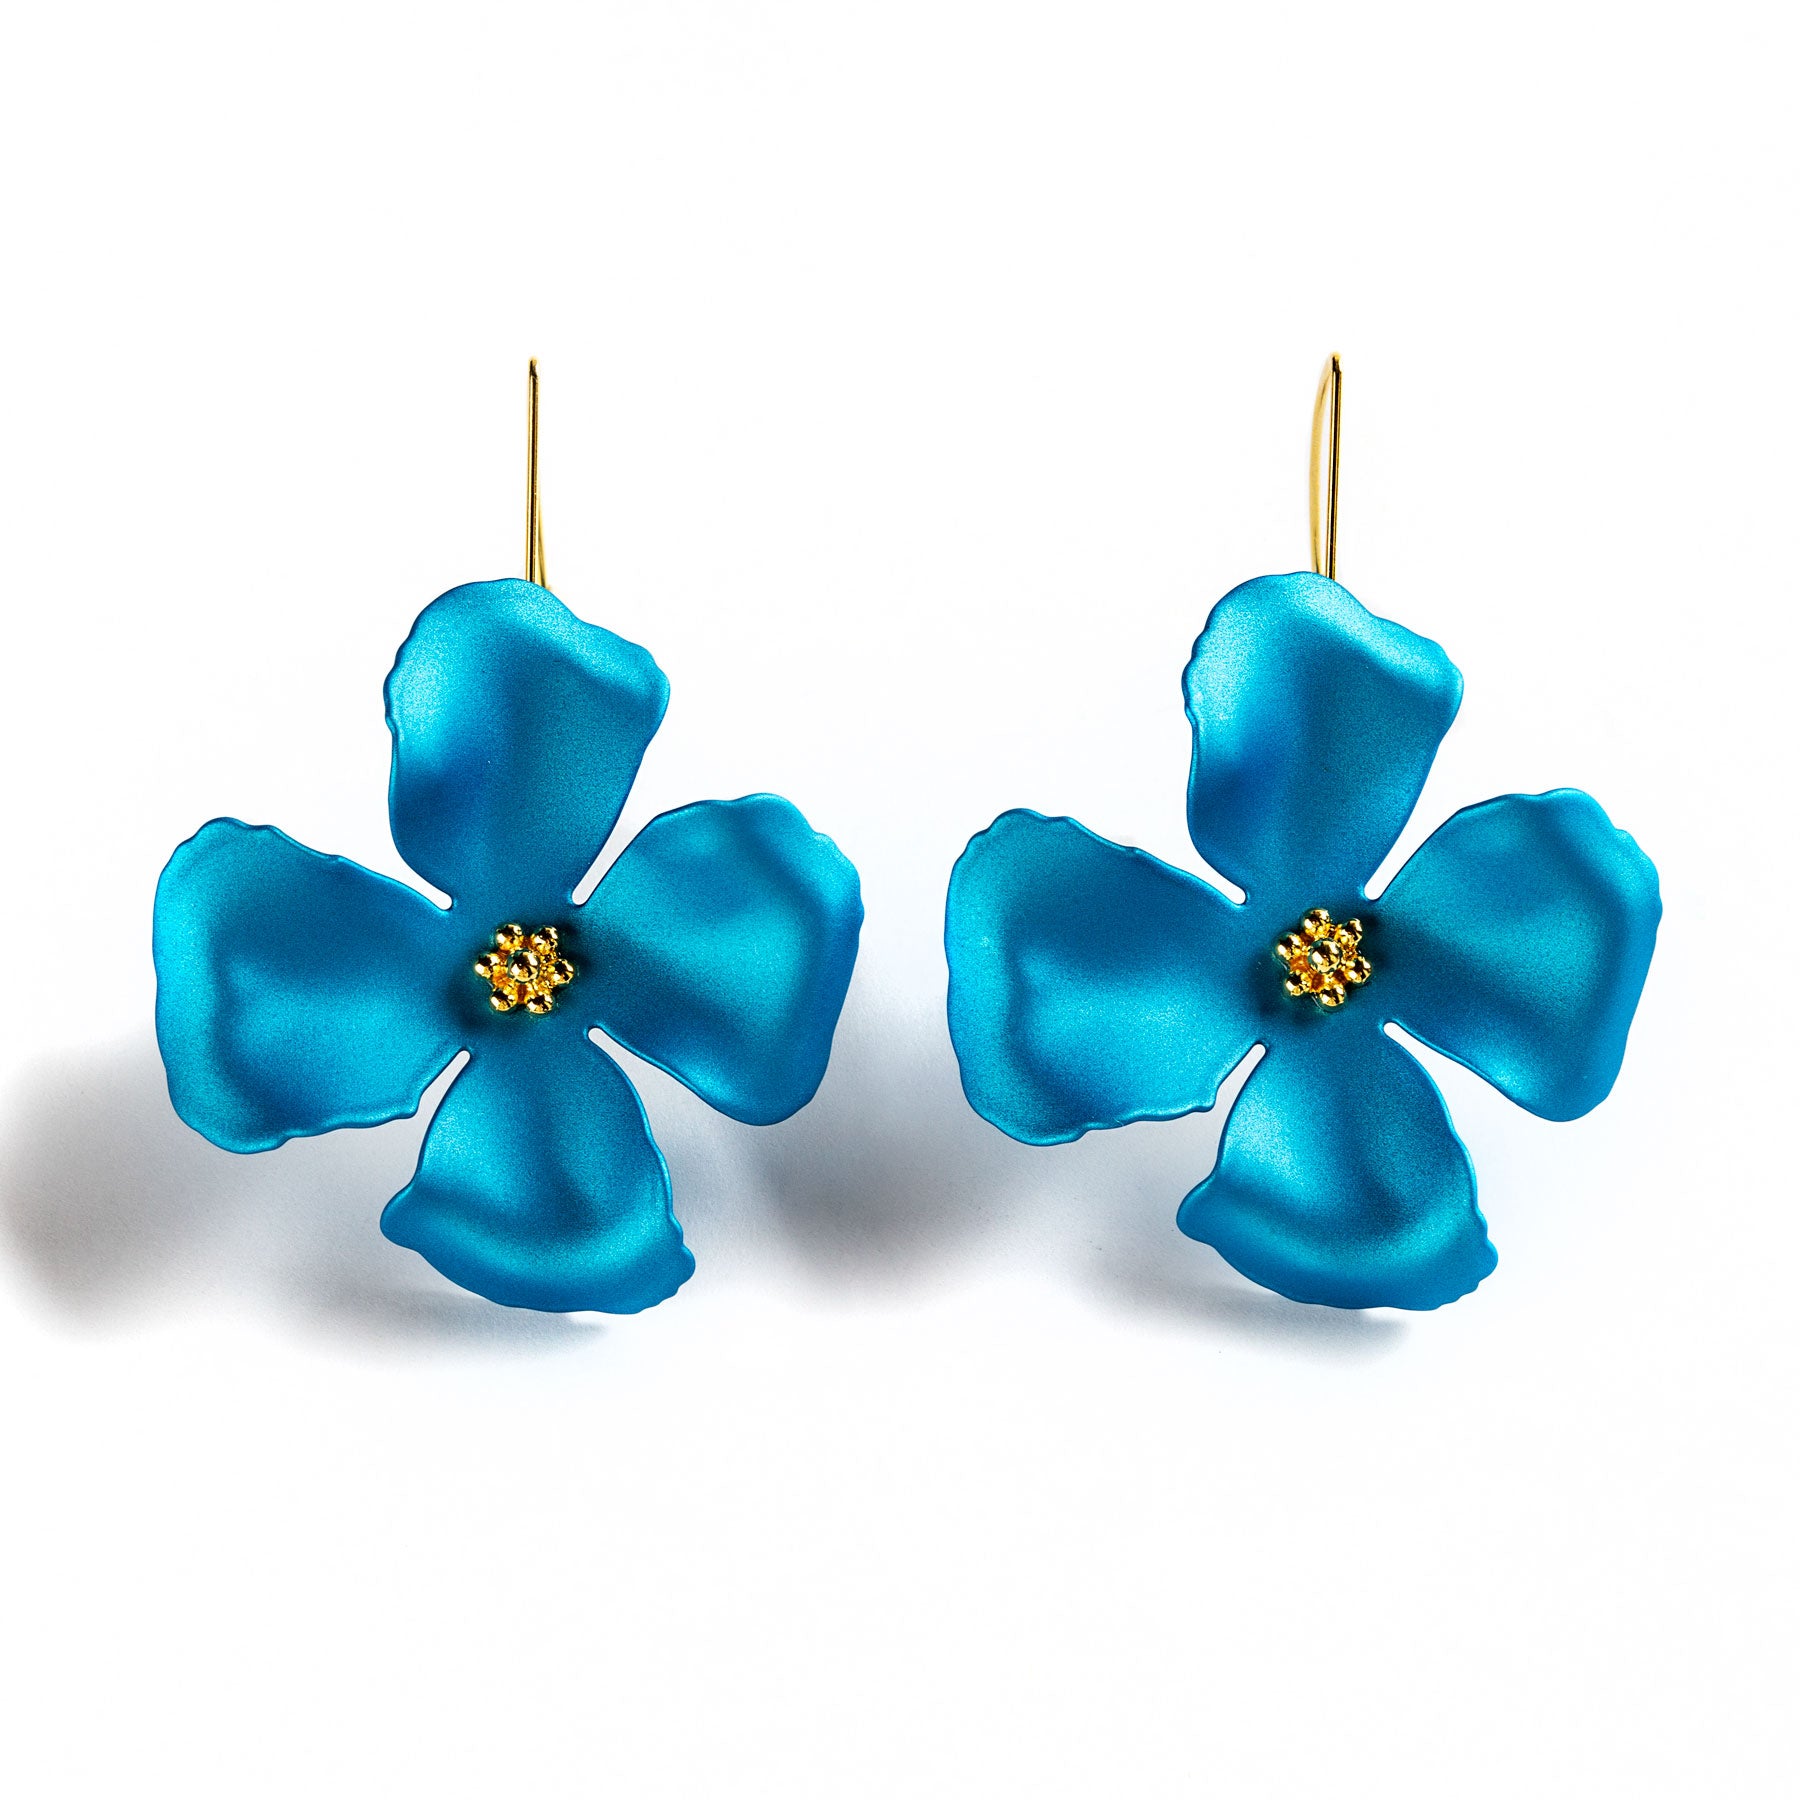 GOLDEN METAL FLOWER LONG EARRINGS TURQUOISE COLOR HAND PAINTED